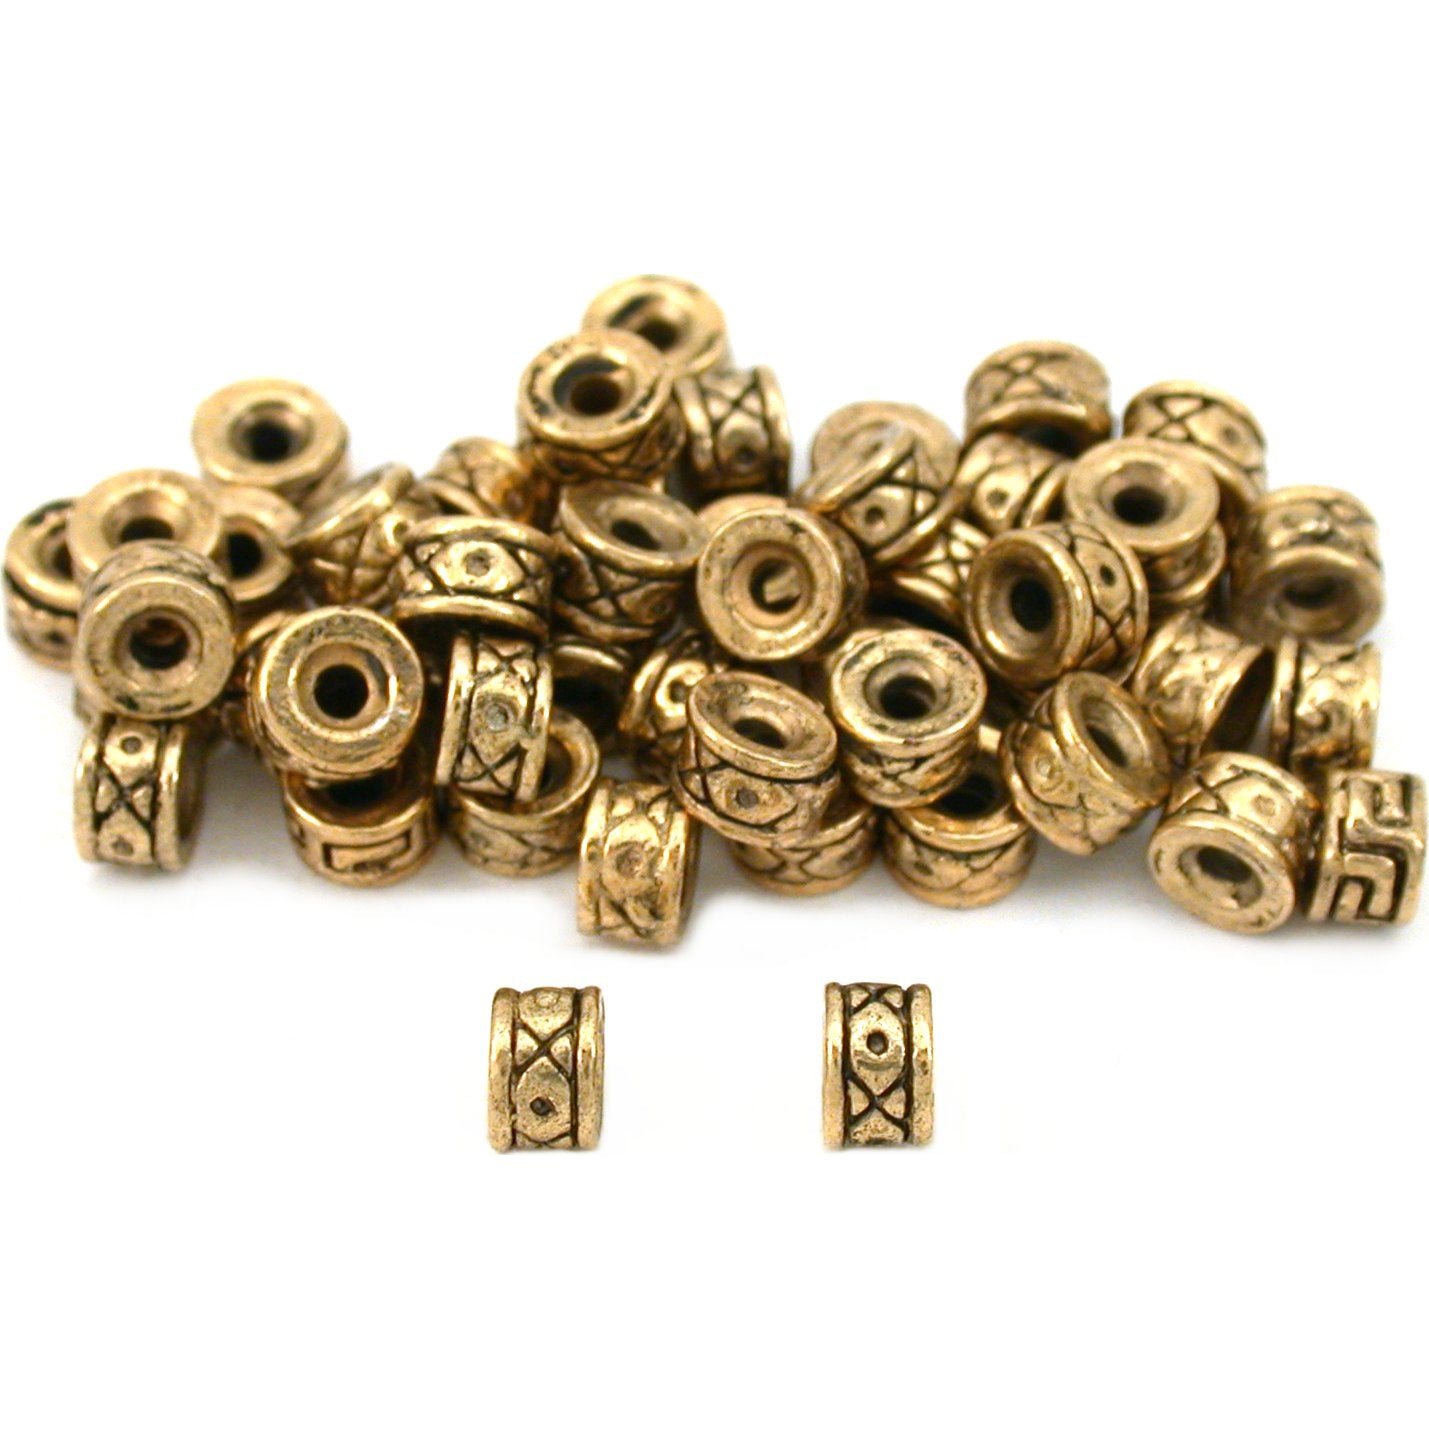 Bali Spacer Antique Gold Plated Beads 5mm 50Pcs Approx.